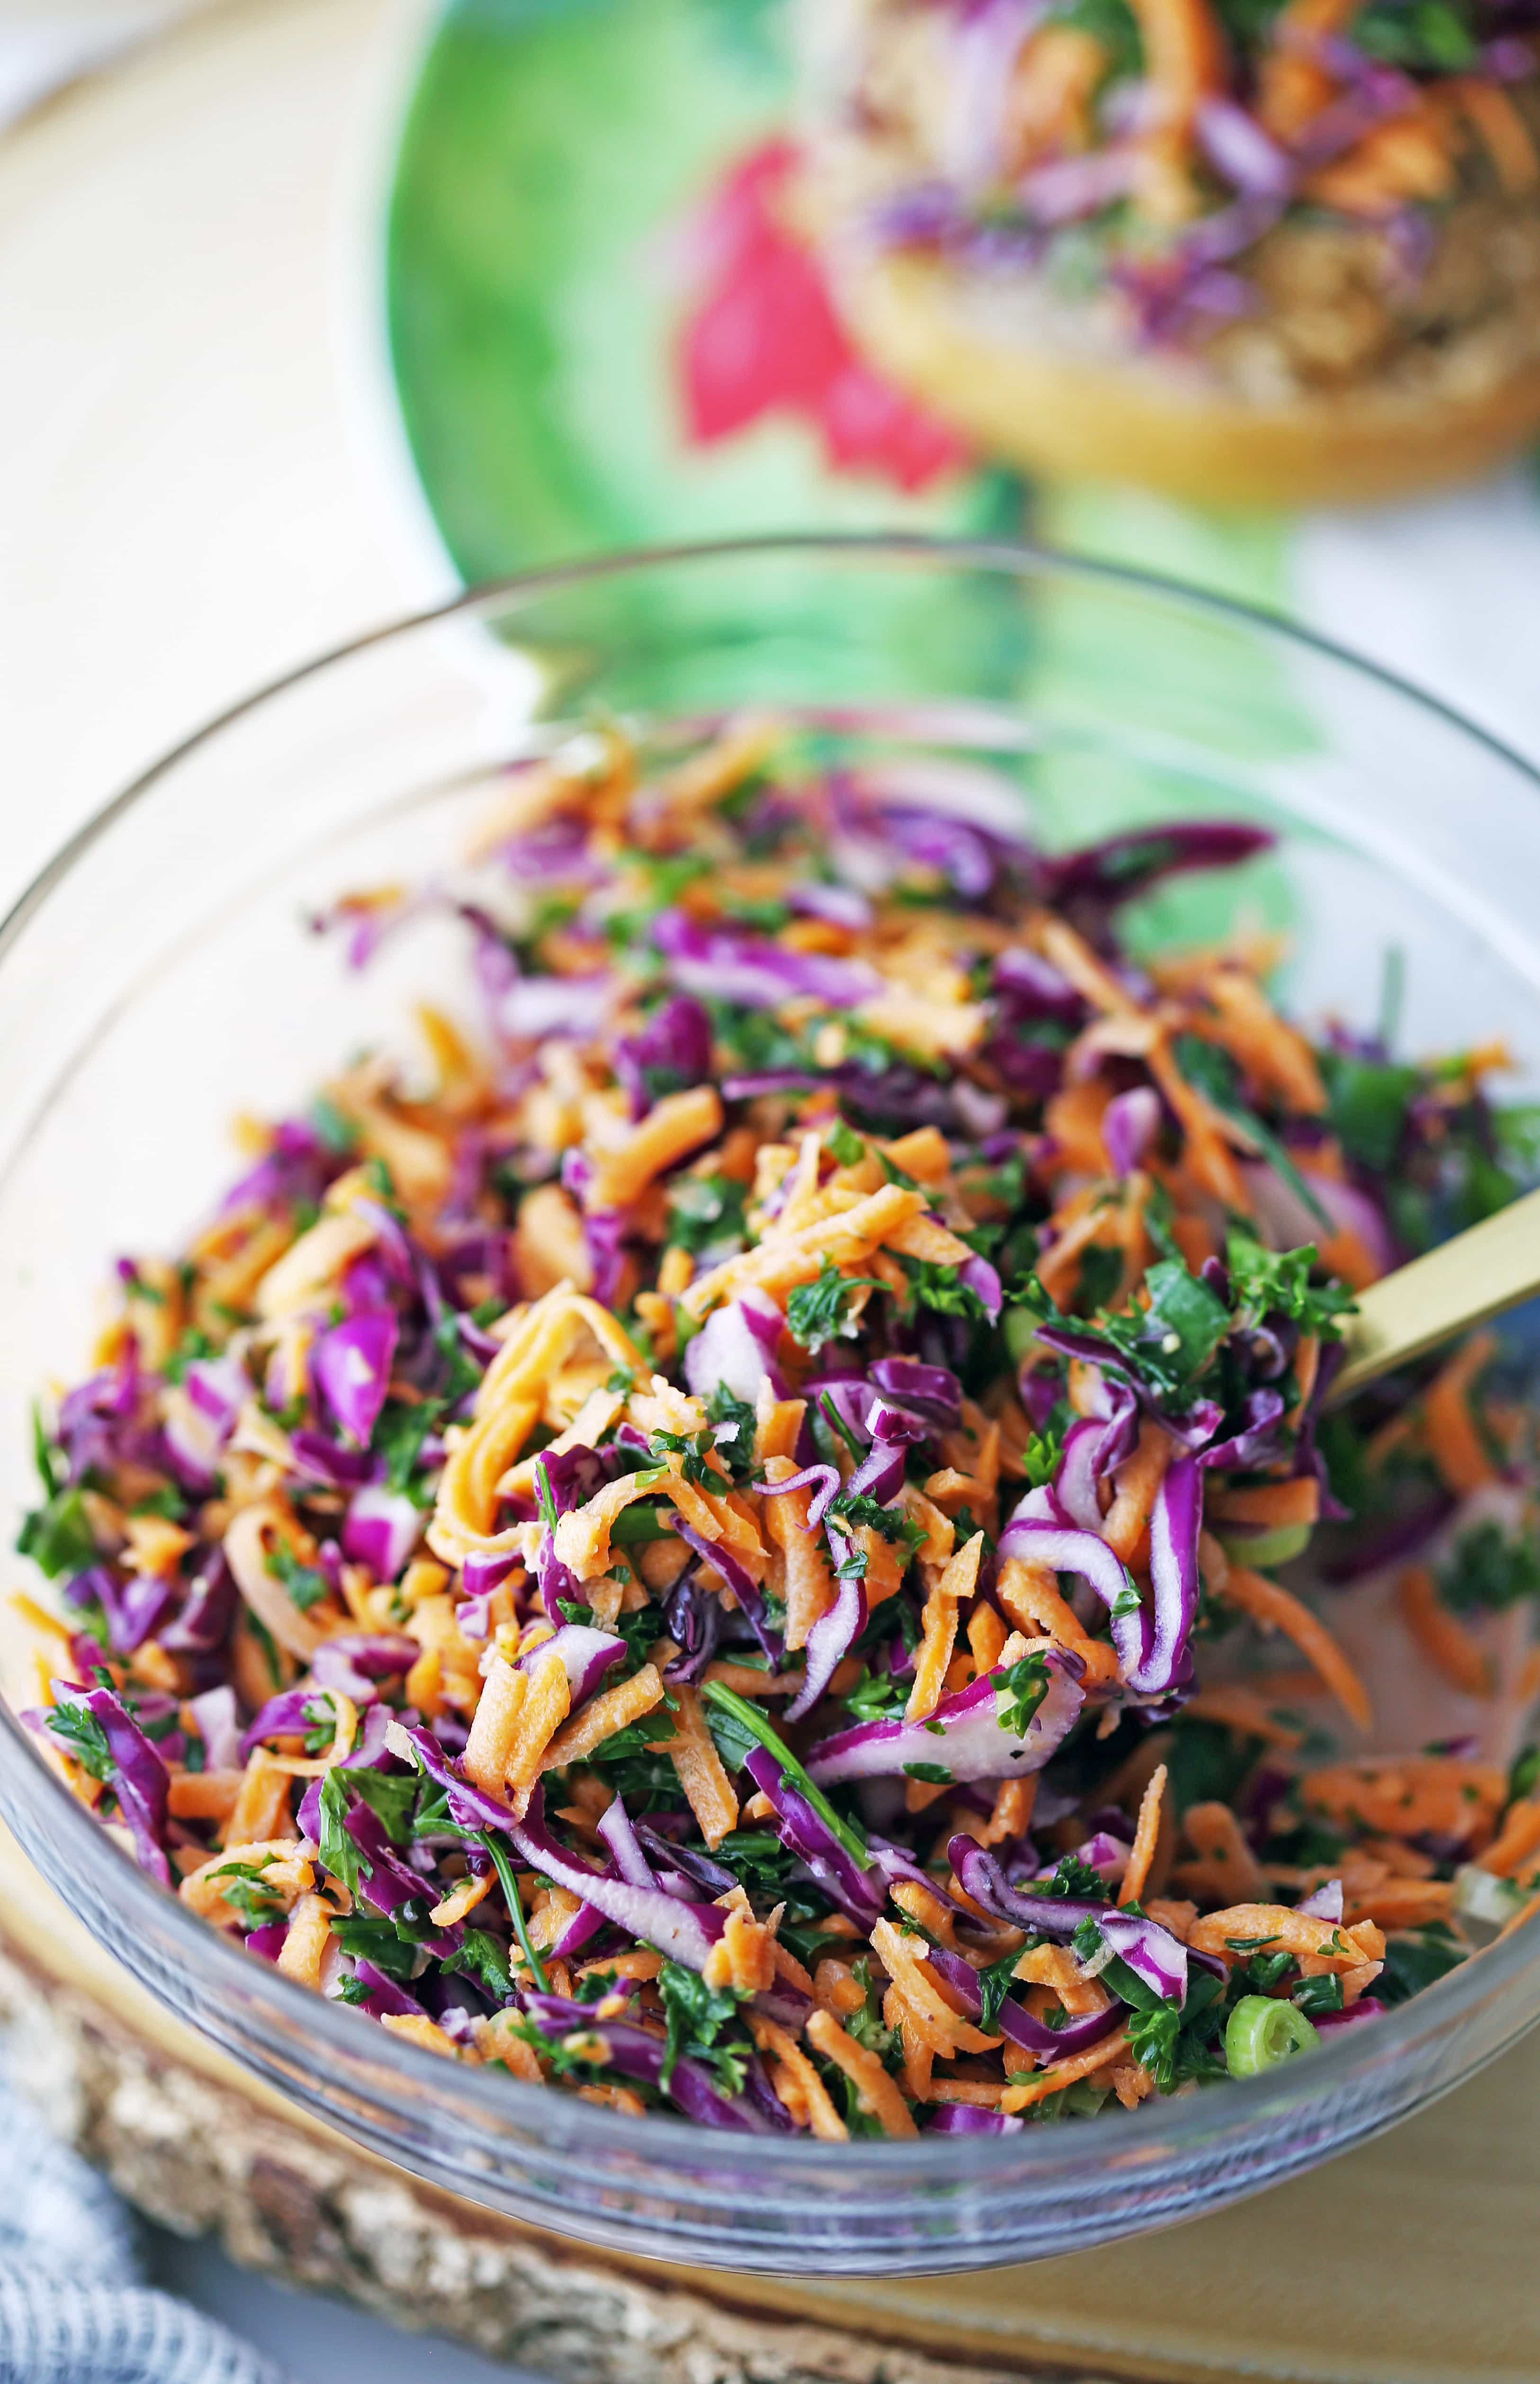 Colourful carrot cabbage coleslaw with apple cider vinegar dressing in a glass bowl.